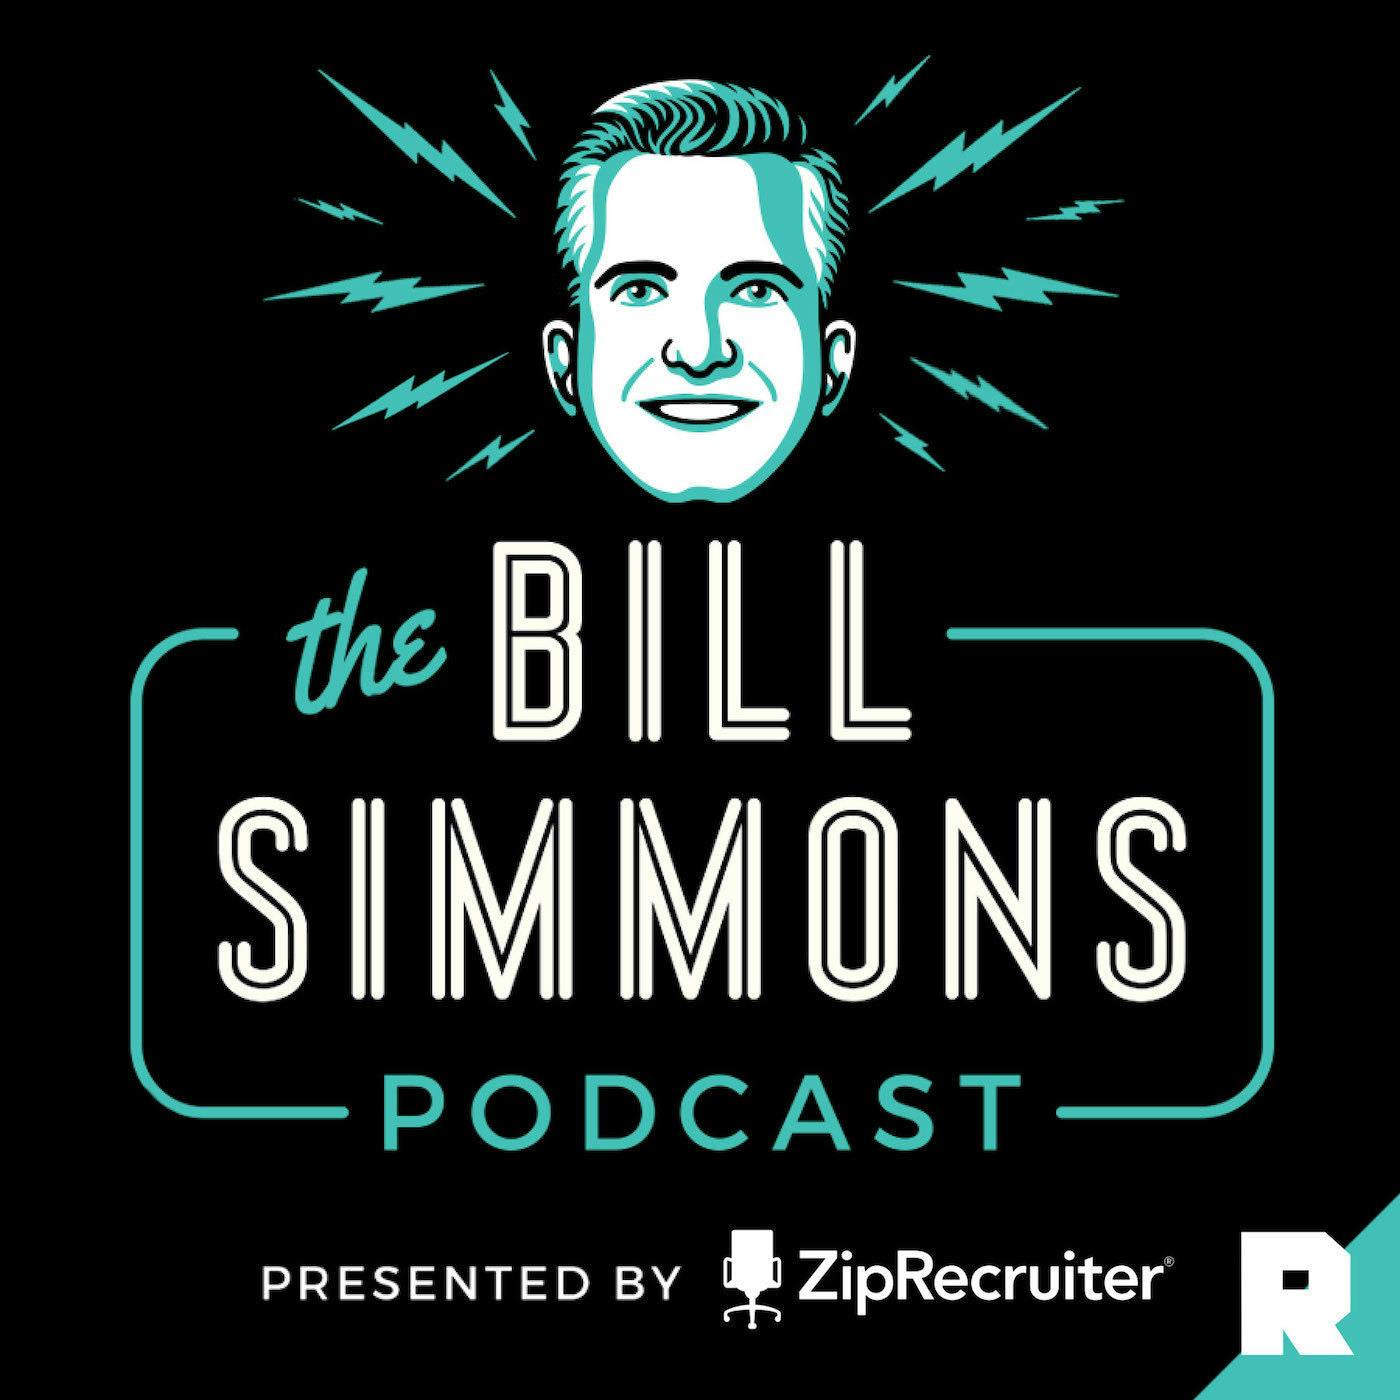 Chuck Klosterman on the Tiger Woods Book, NFL Draft QBs, and Rondo’s Renaissance | The Bill Simmons Podcast (Ep. 355)